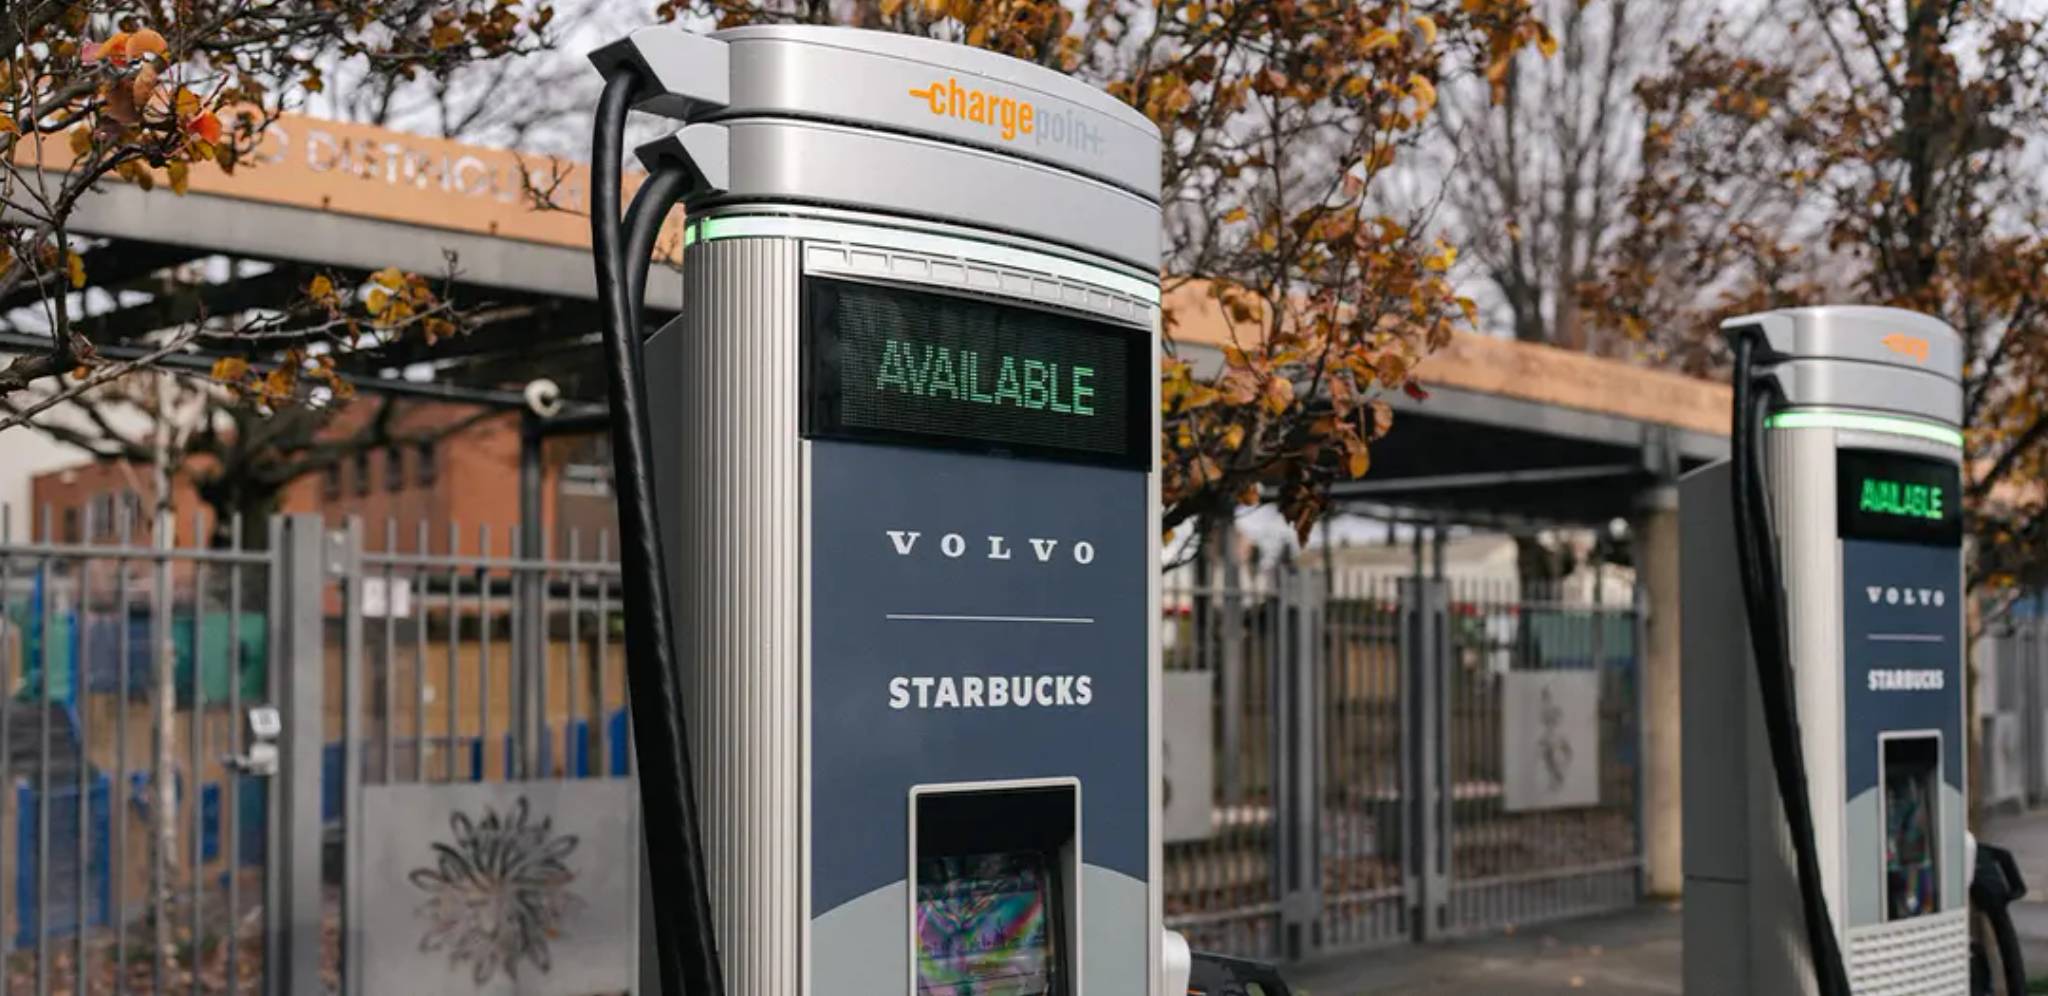 Starbucks enters the EV business with charging points